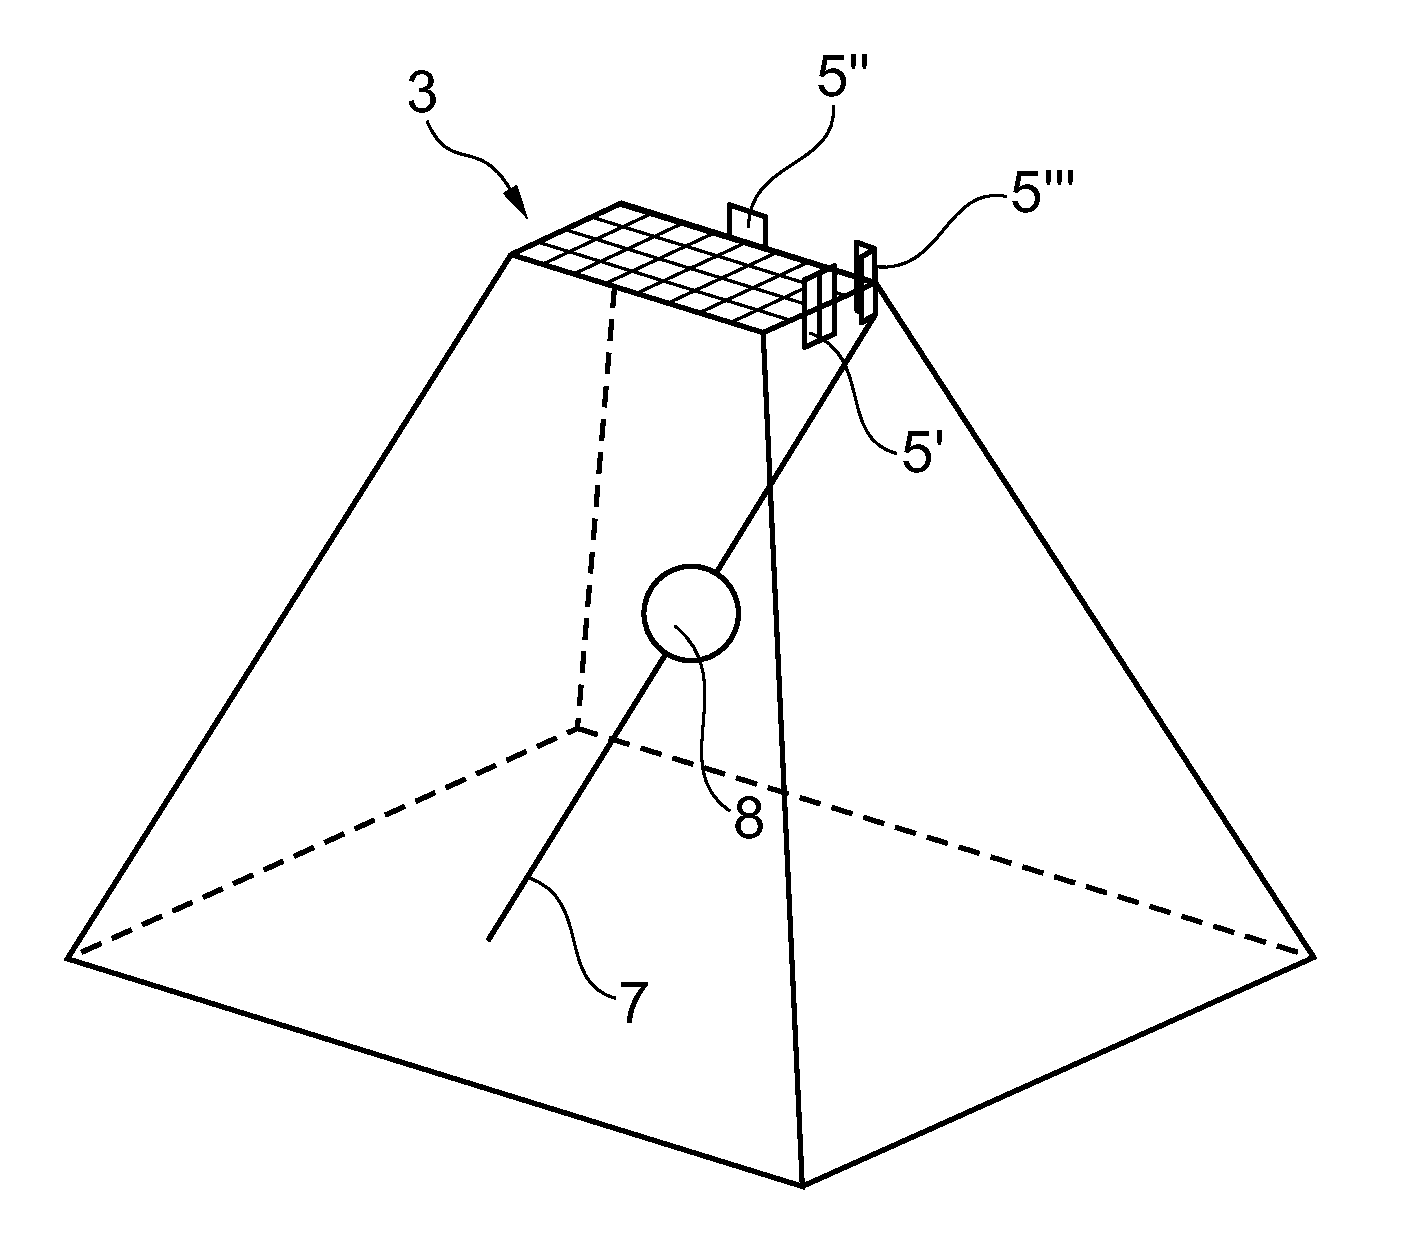 Biopsy guide with an ultrasound transducer and method of using same